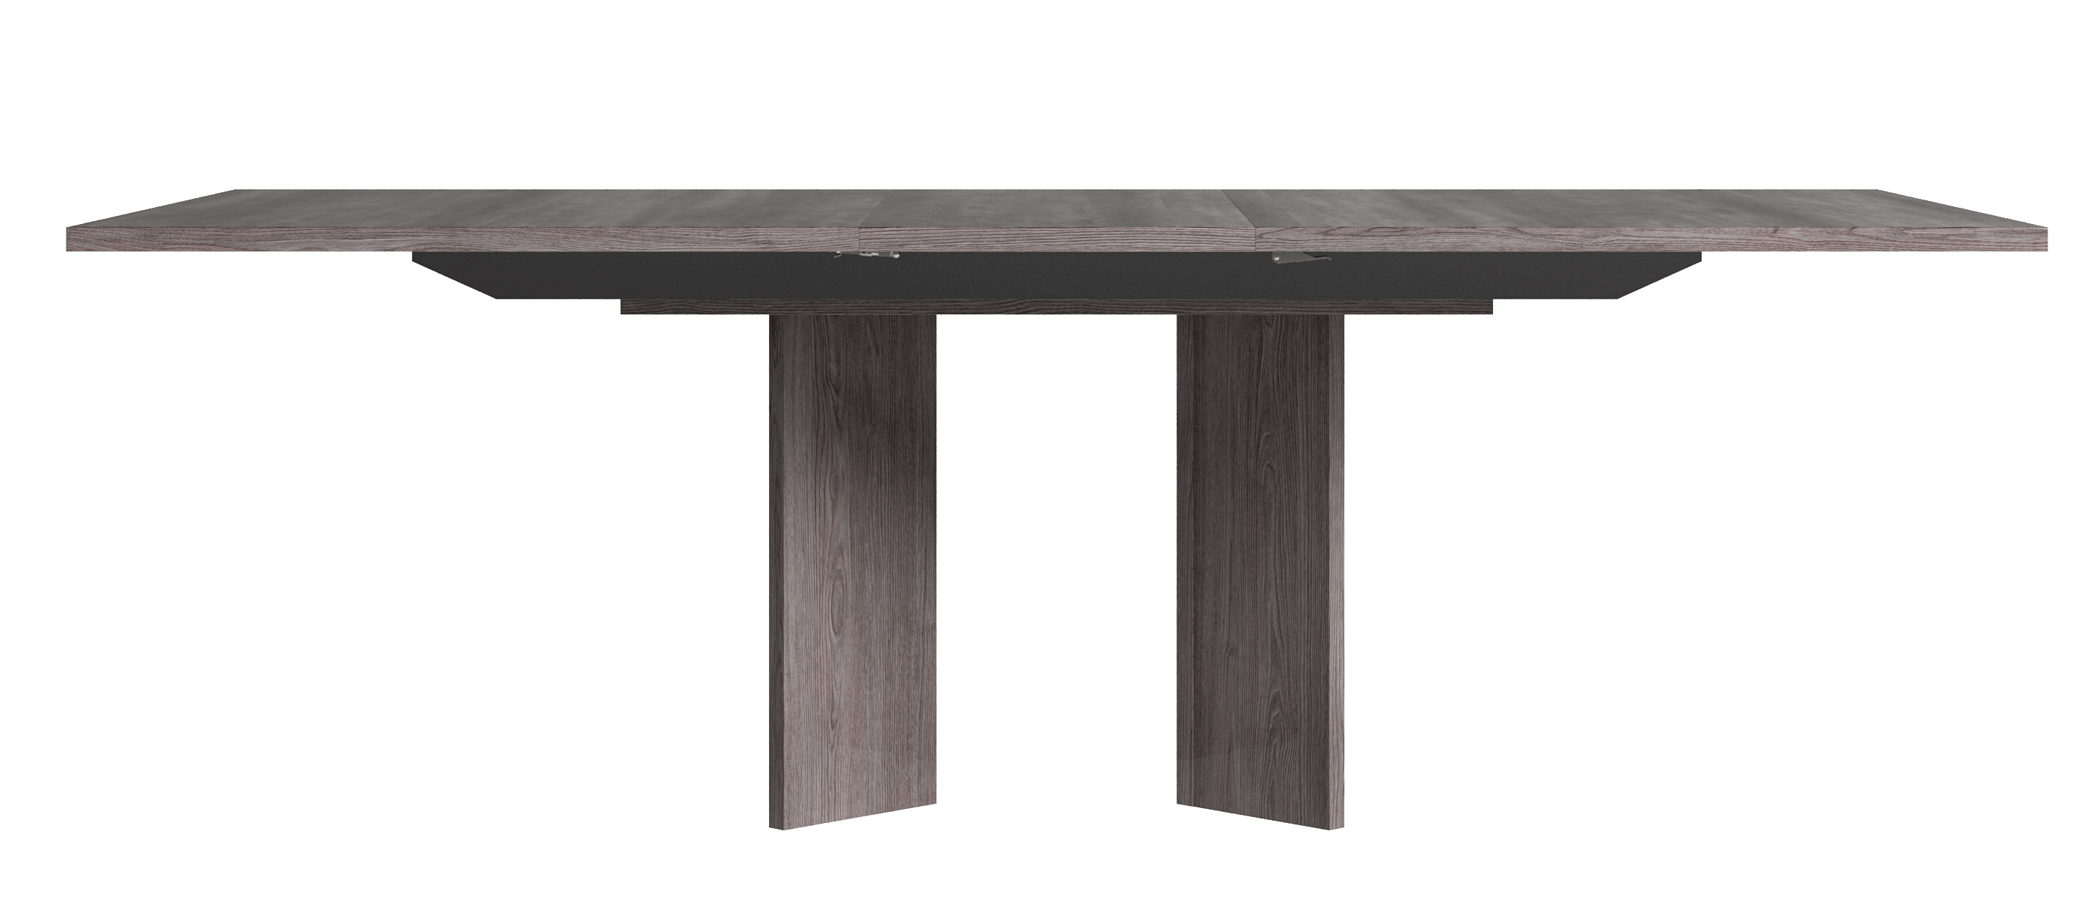 Brands Status Modern Collections, Italy Viola Dining table